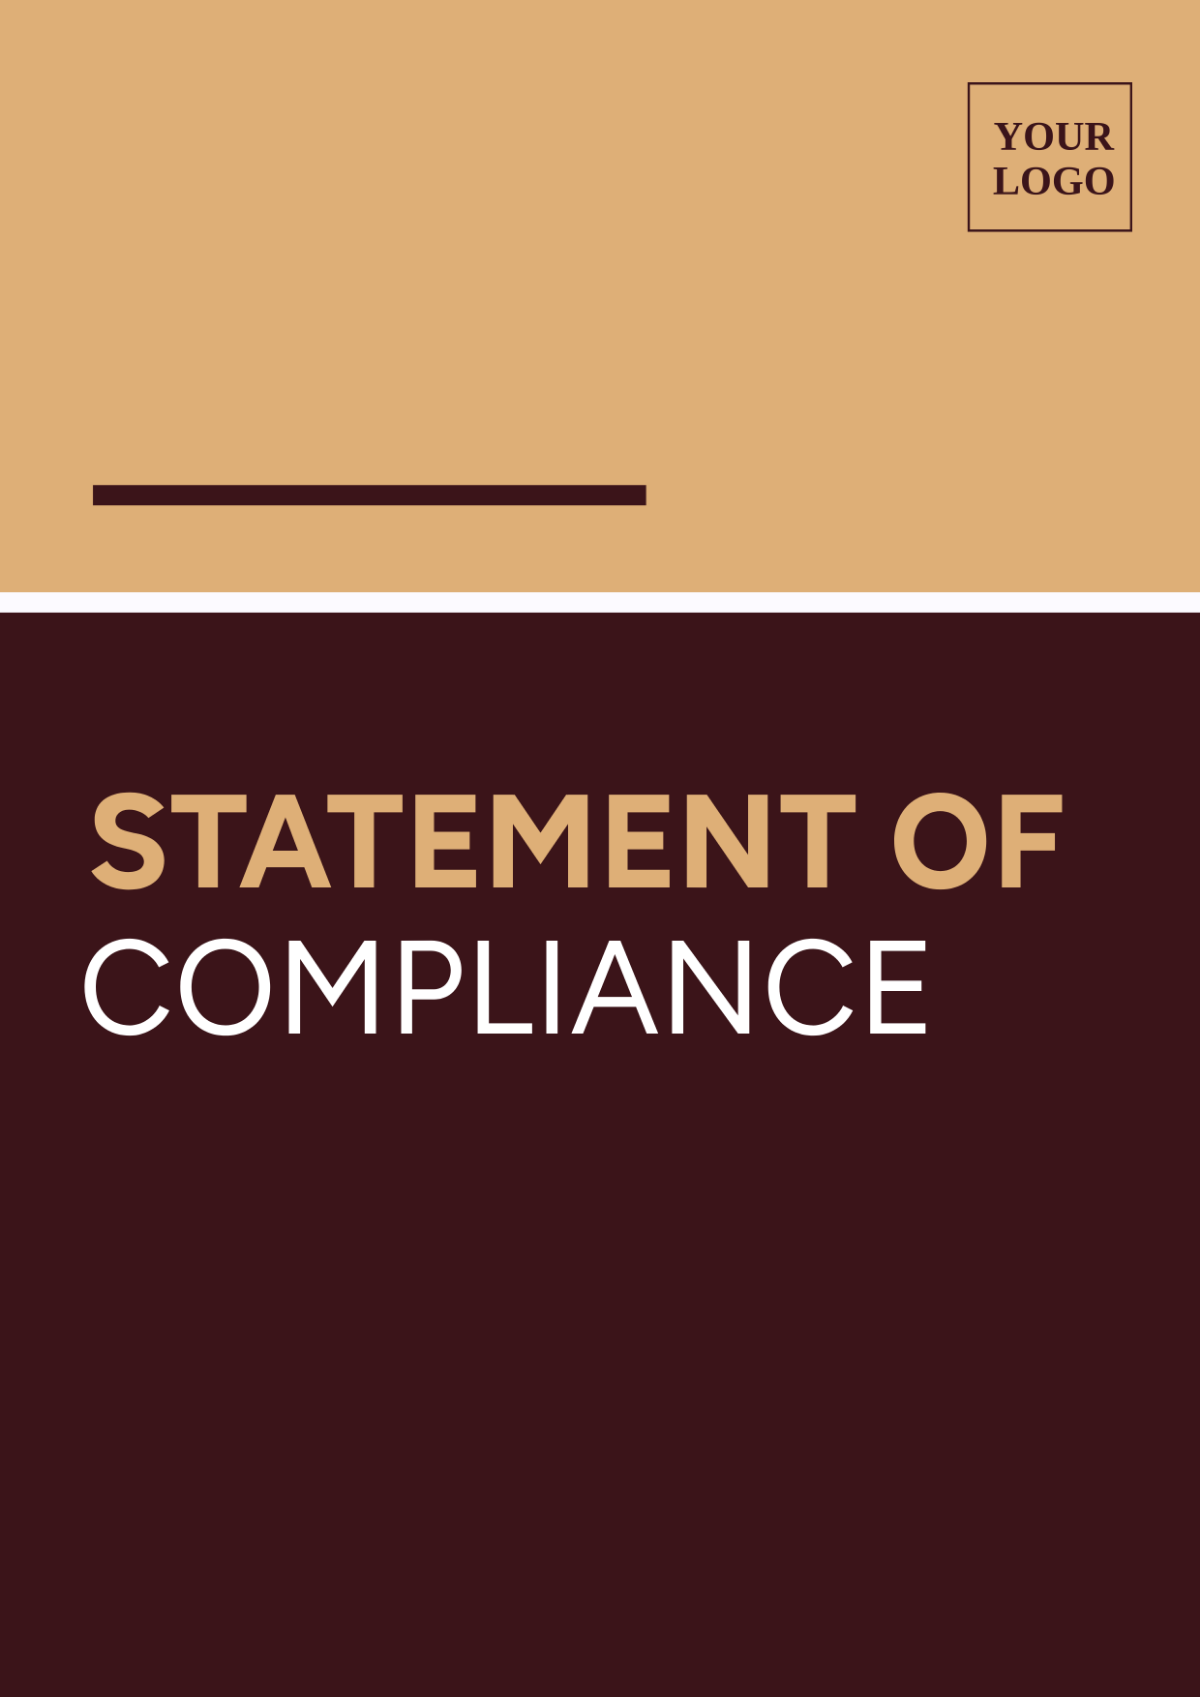 Statement Of Compliance Template